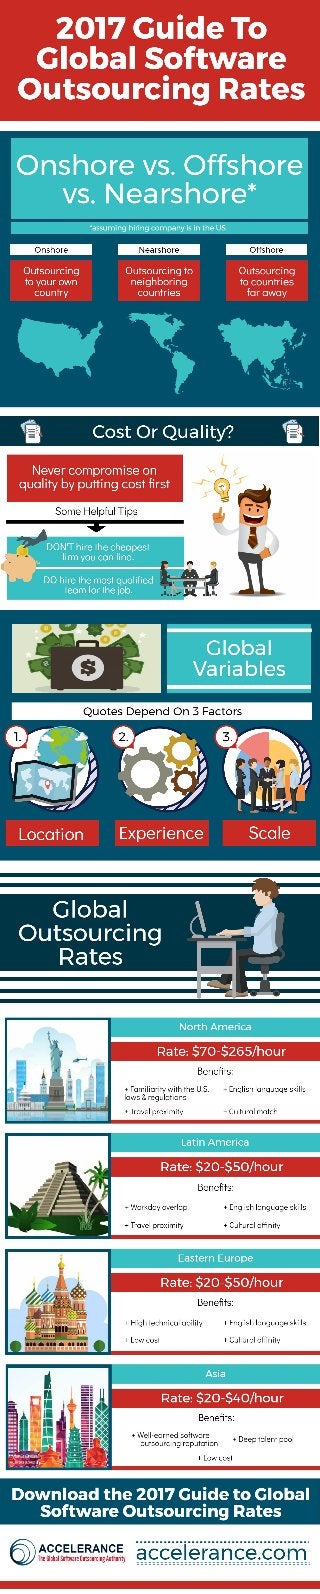 2017 Guide to Global Software Outsourcing Rates